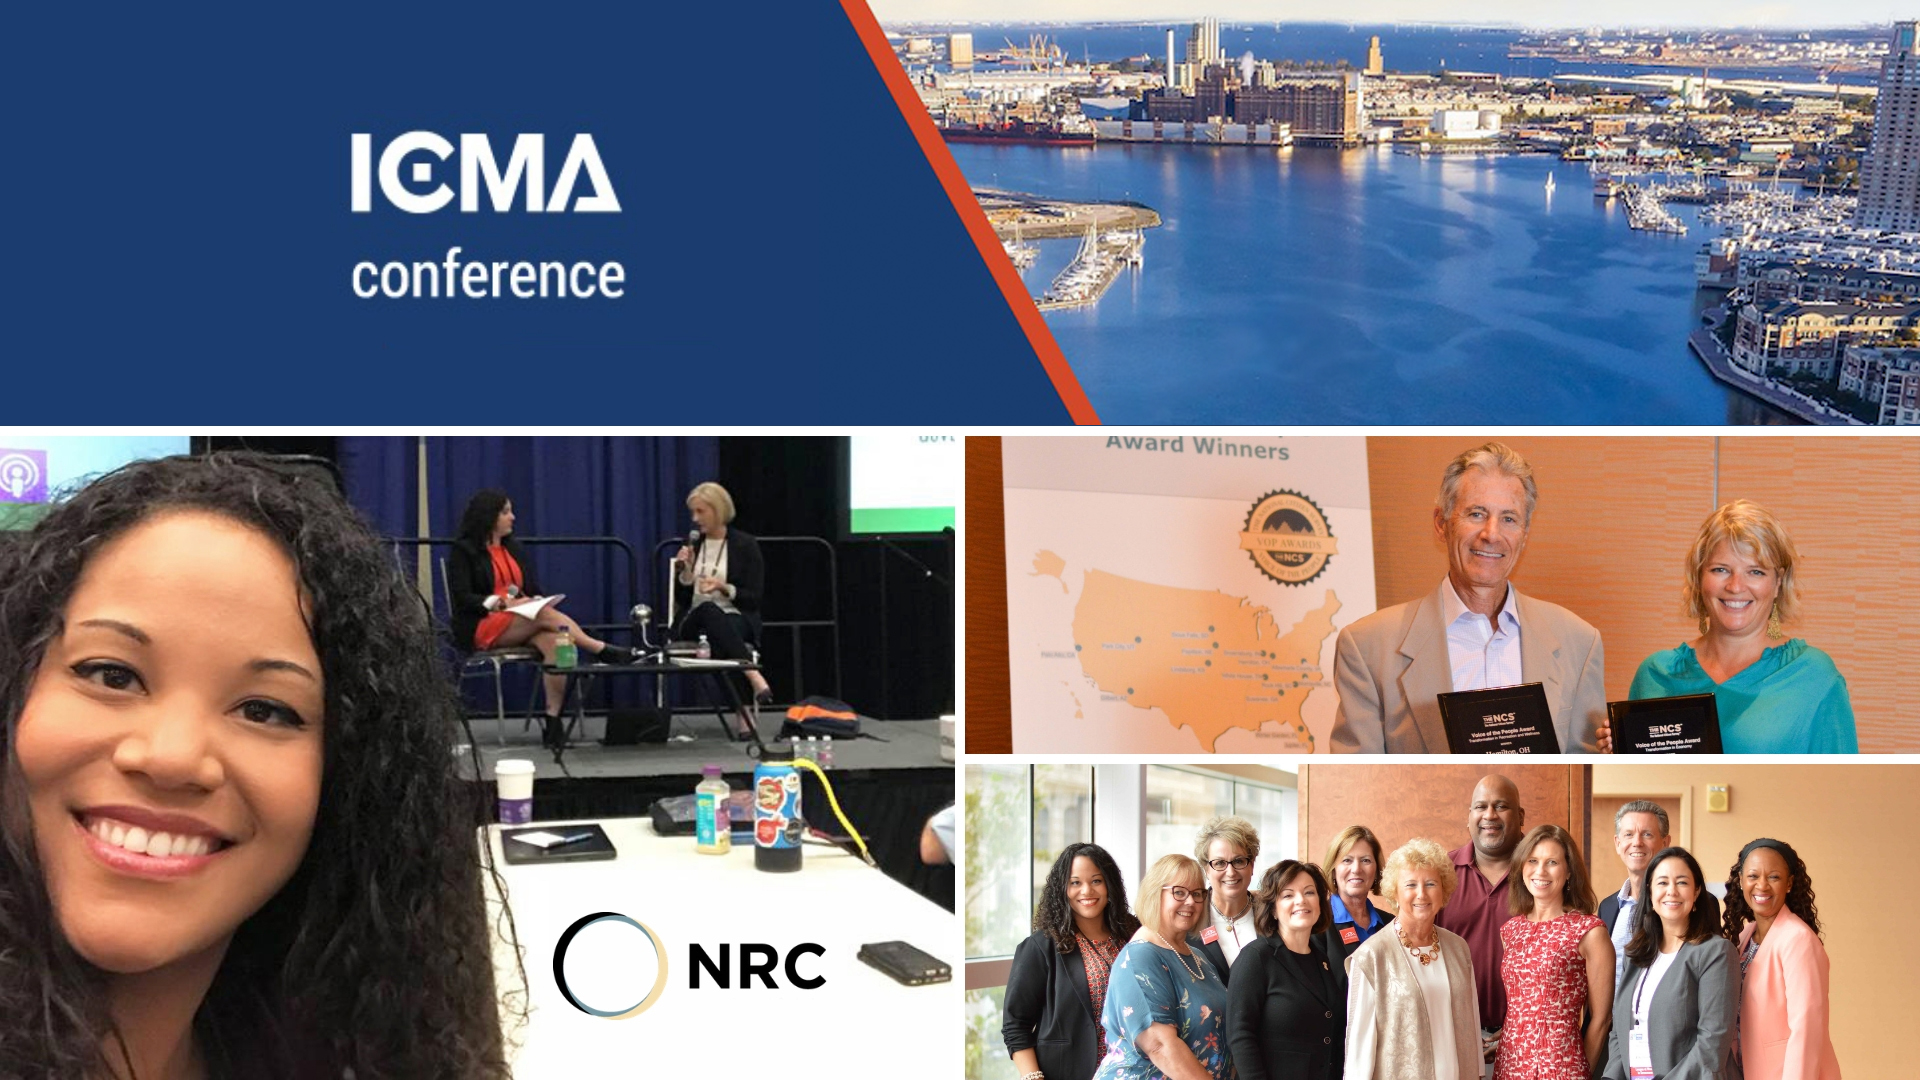 The 2018 ICMA Conference Made Me Laugh, Cry and Journal My Favorite Moments